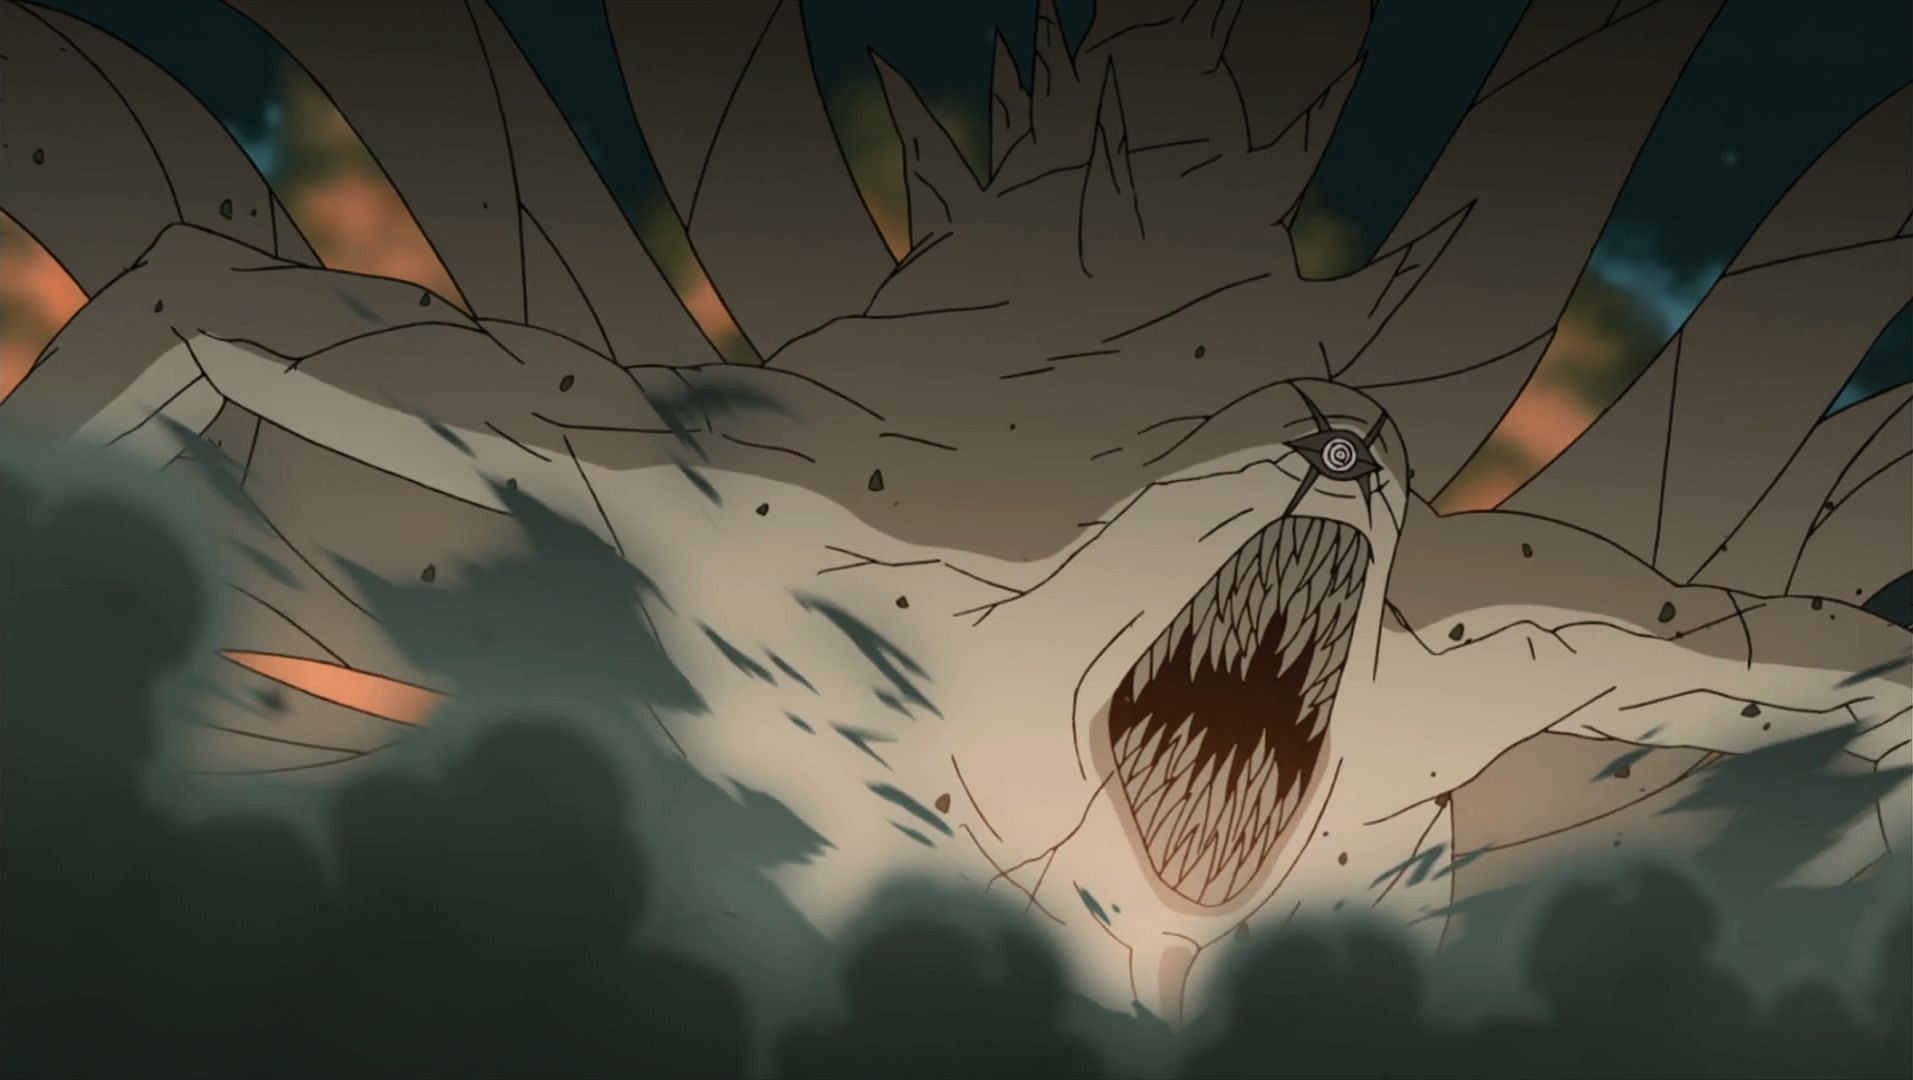 The Ten-Tails as it appears in 'Naruto Shippuden' (Image via Pierrot)